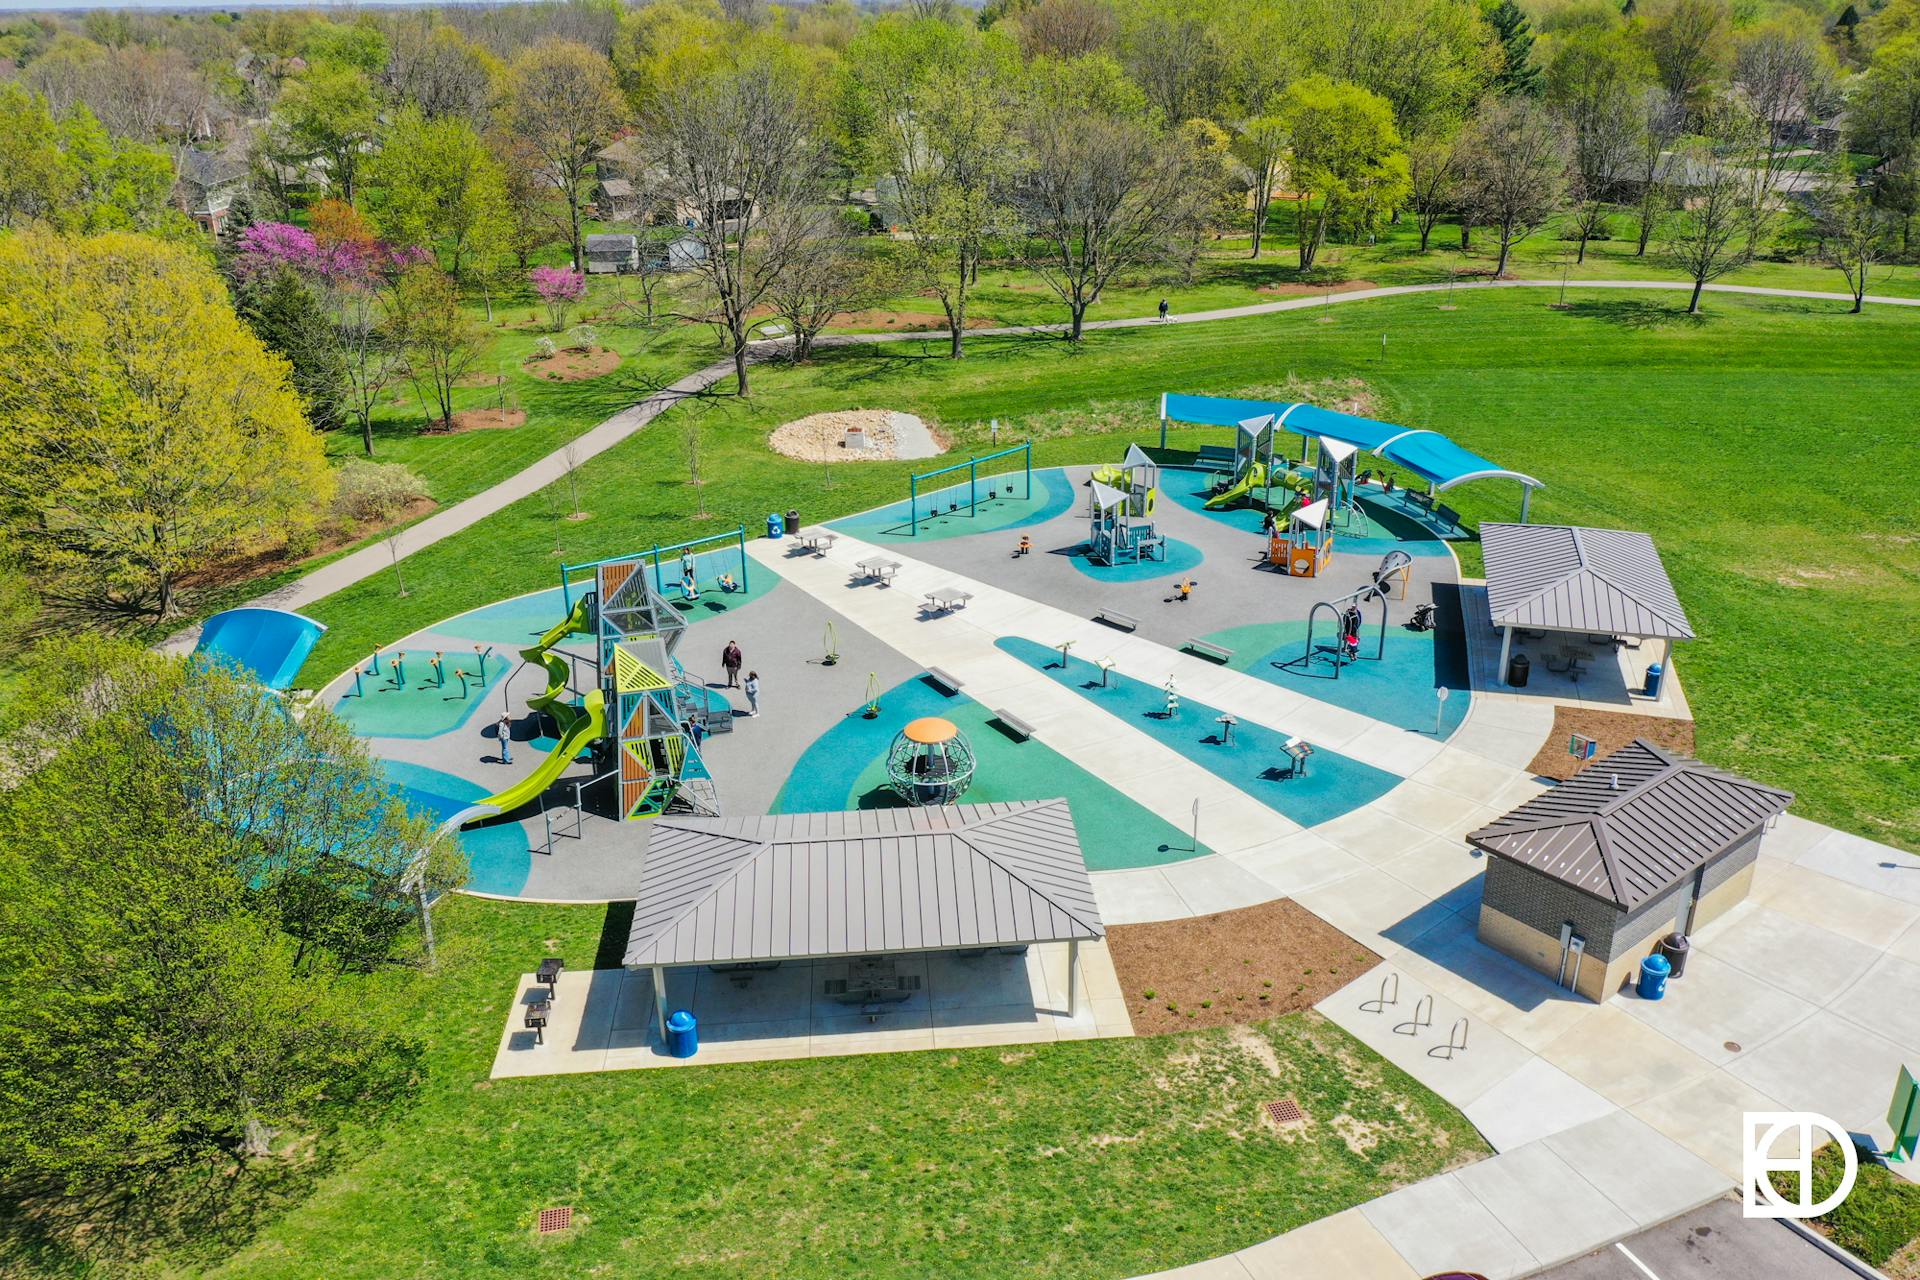 Aerial photo of playground structure at Carey Grove Park.